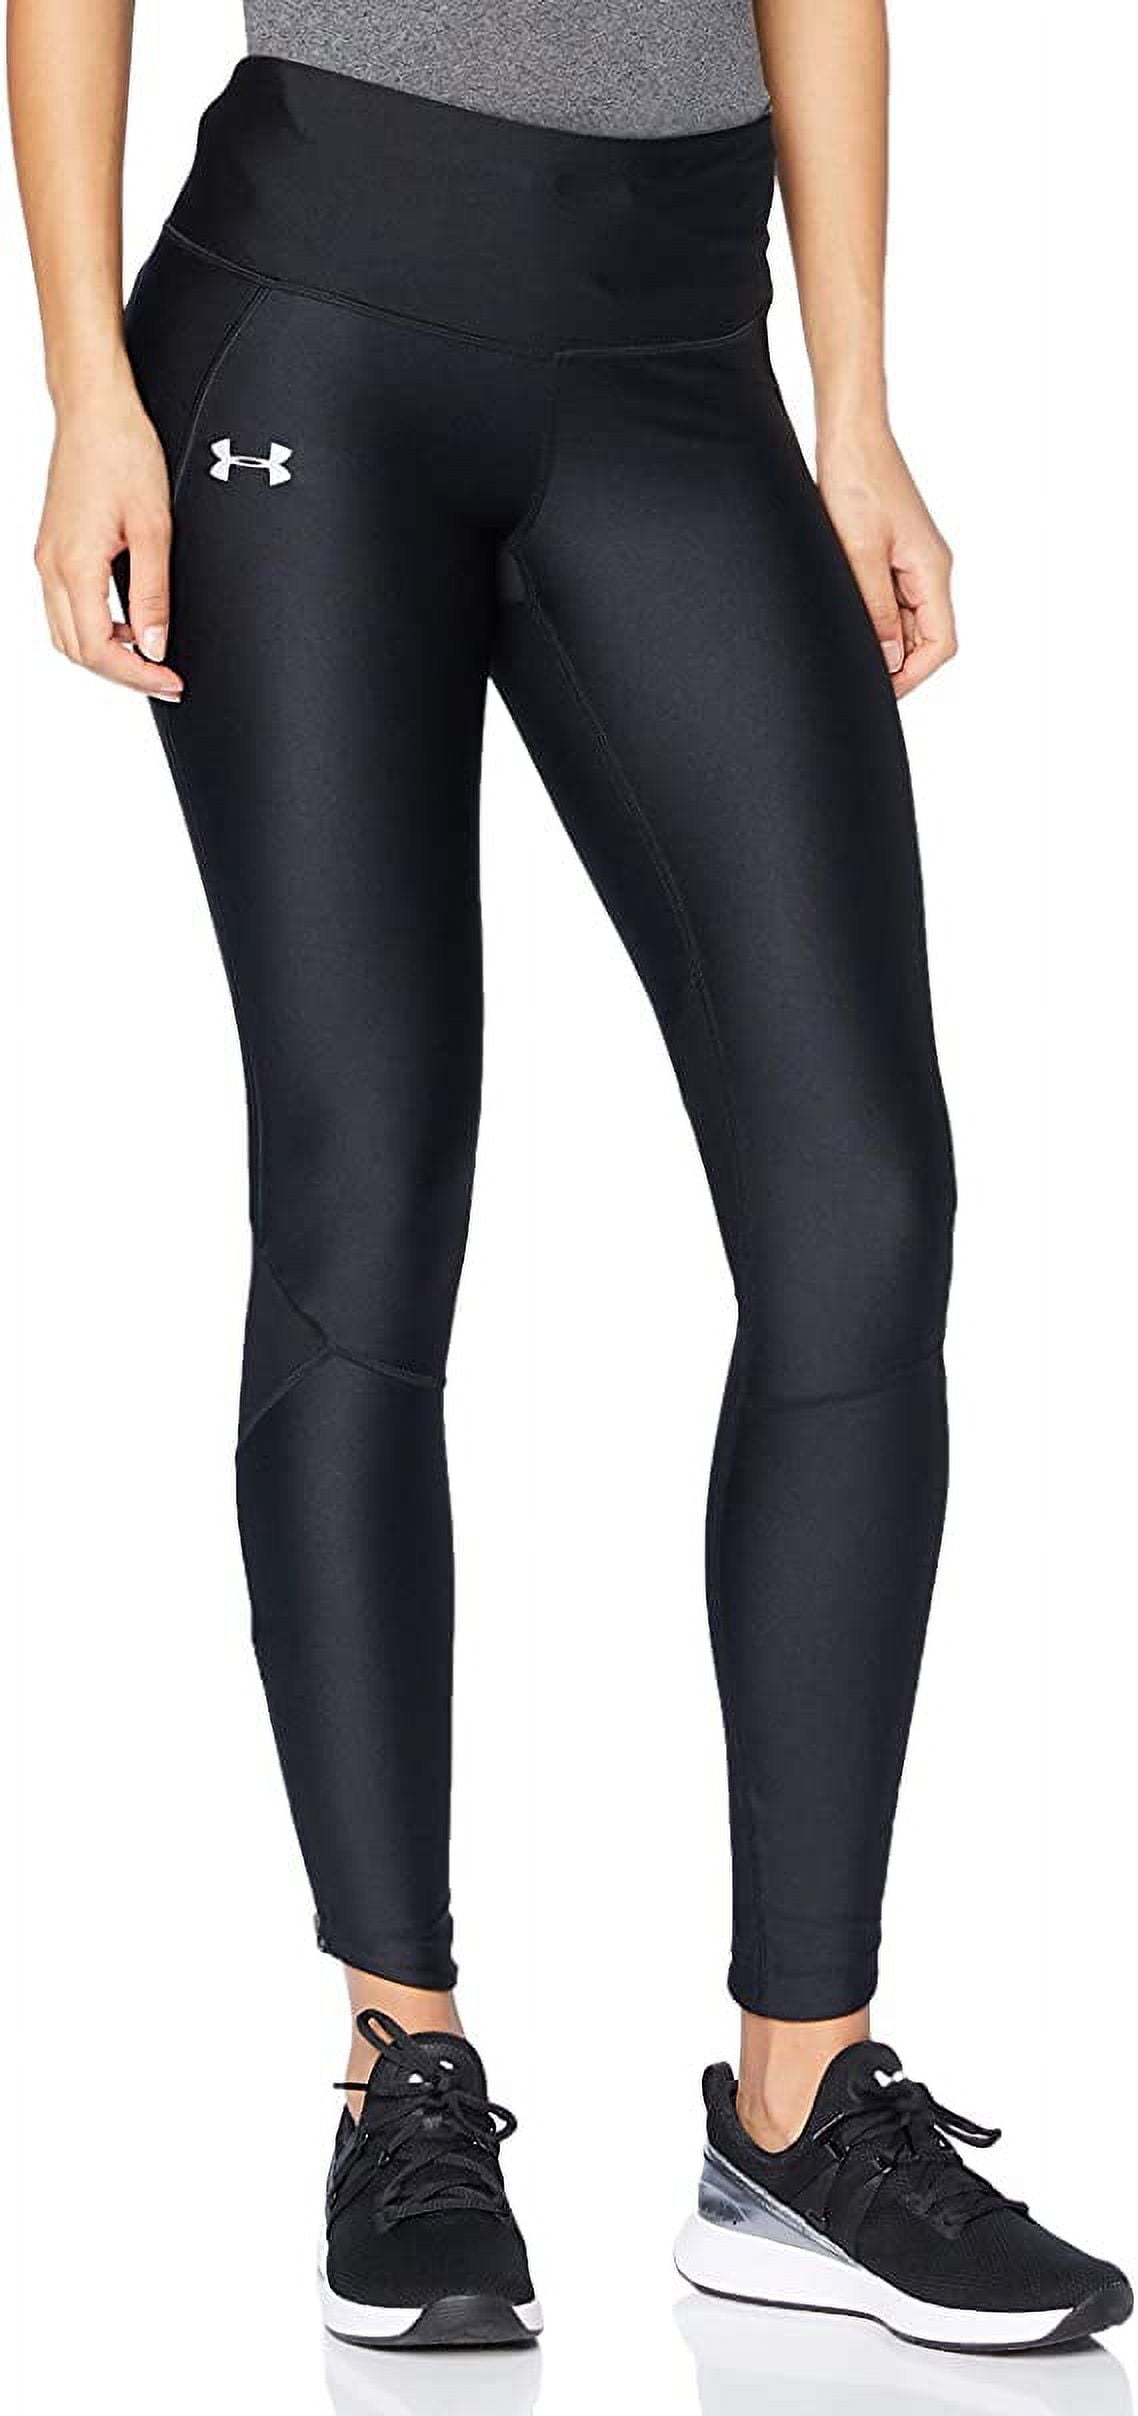 New Under Armour Women's Armour Fly Fast Tights Black/White Large ...